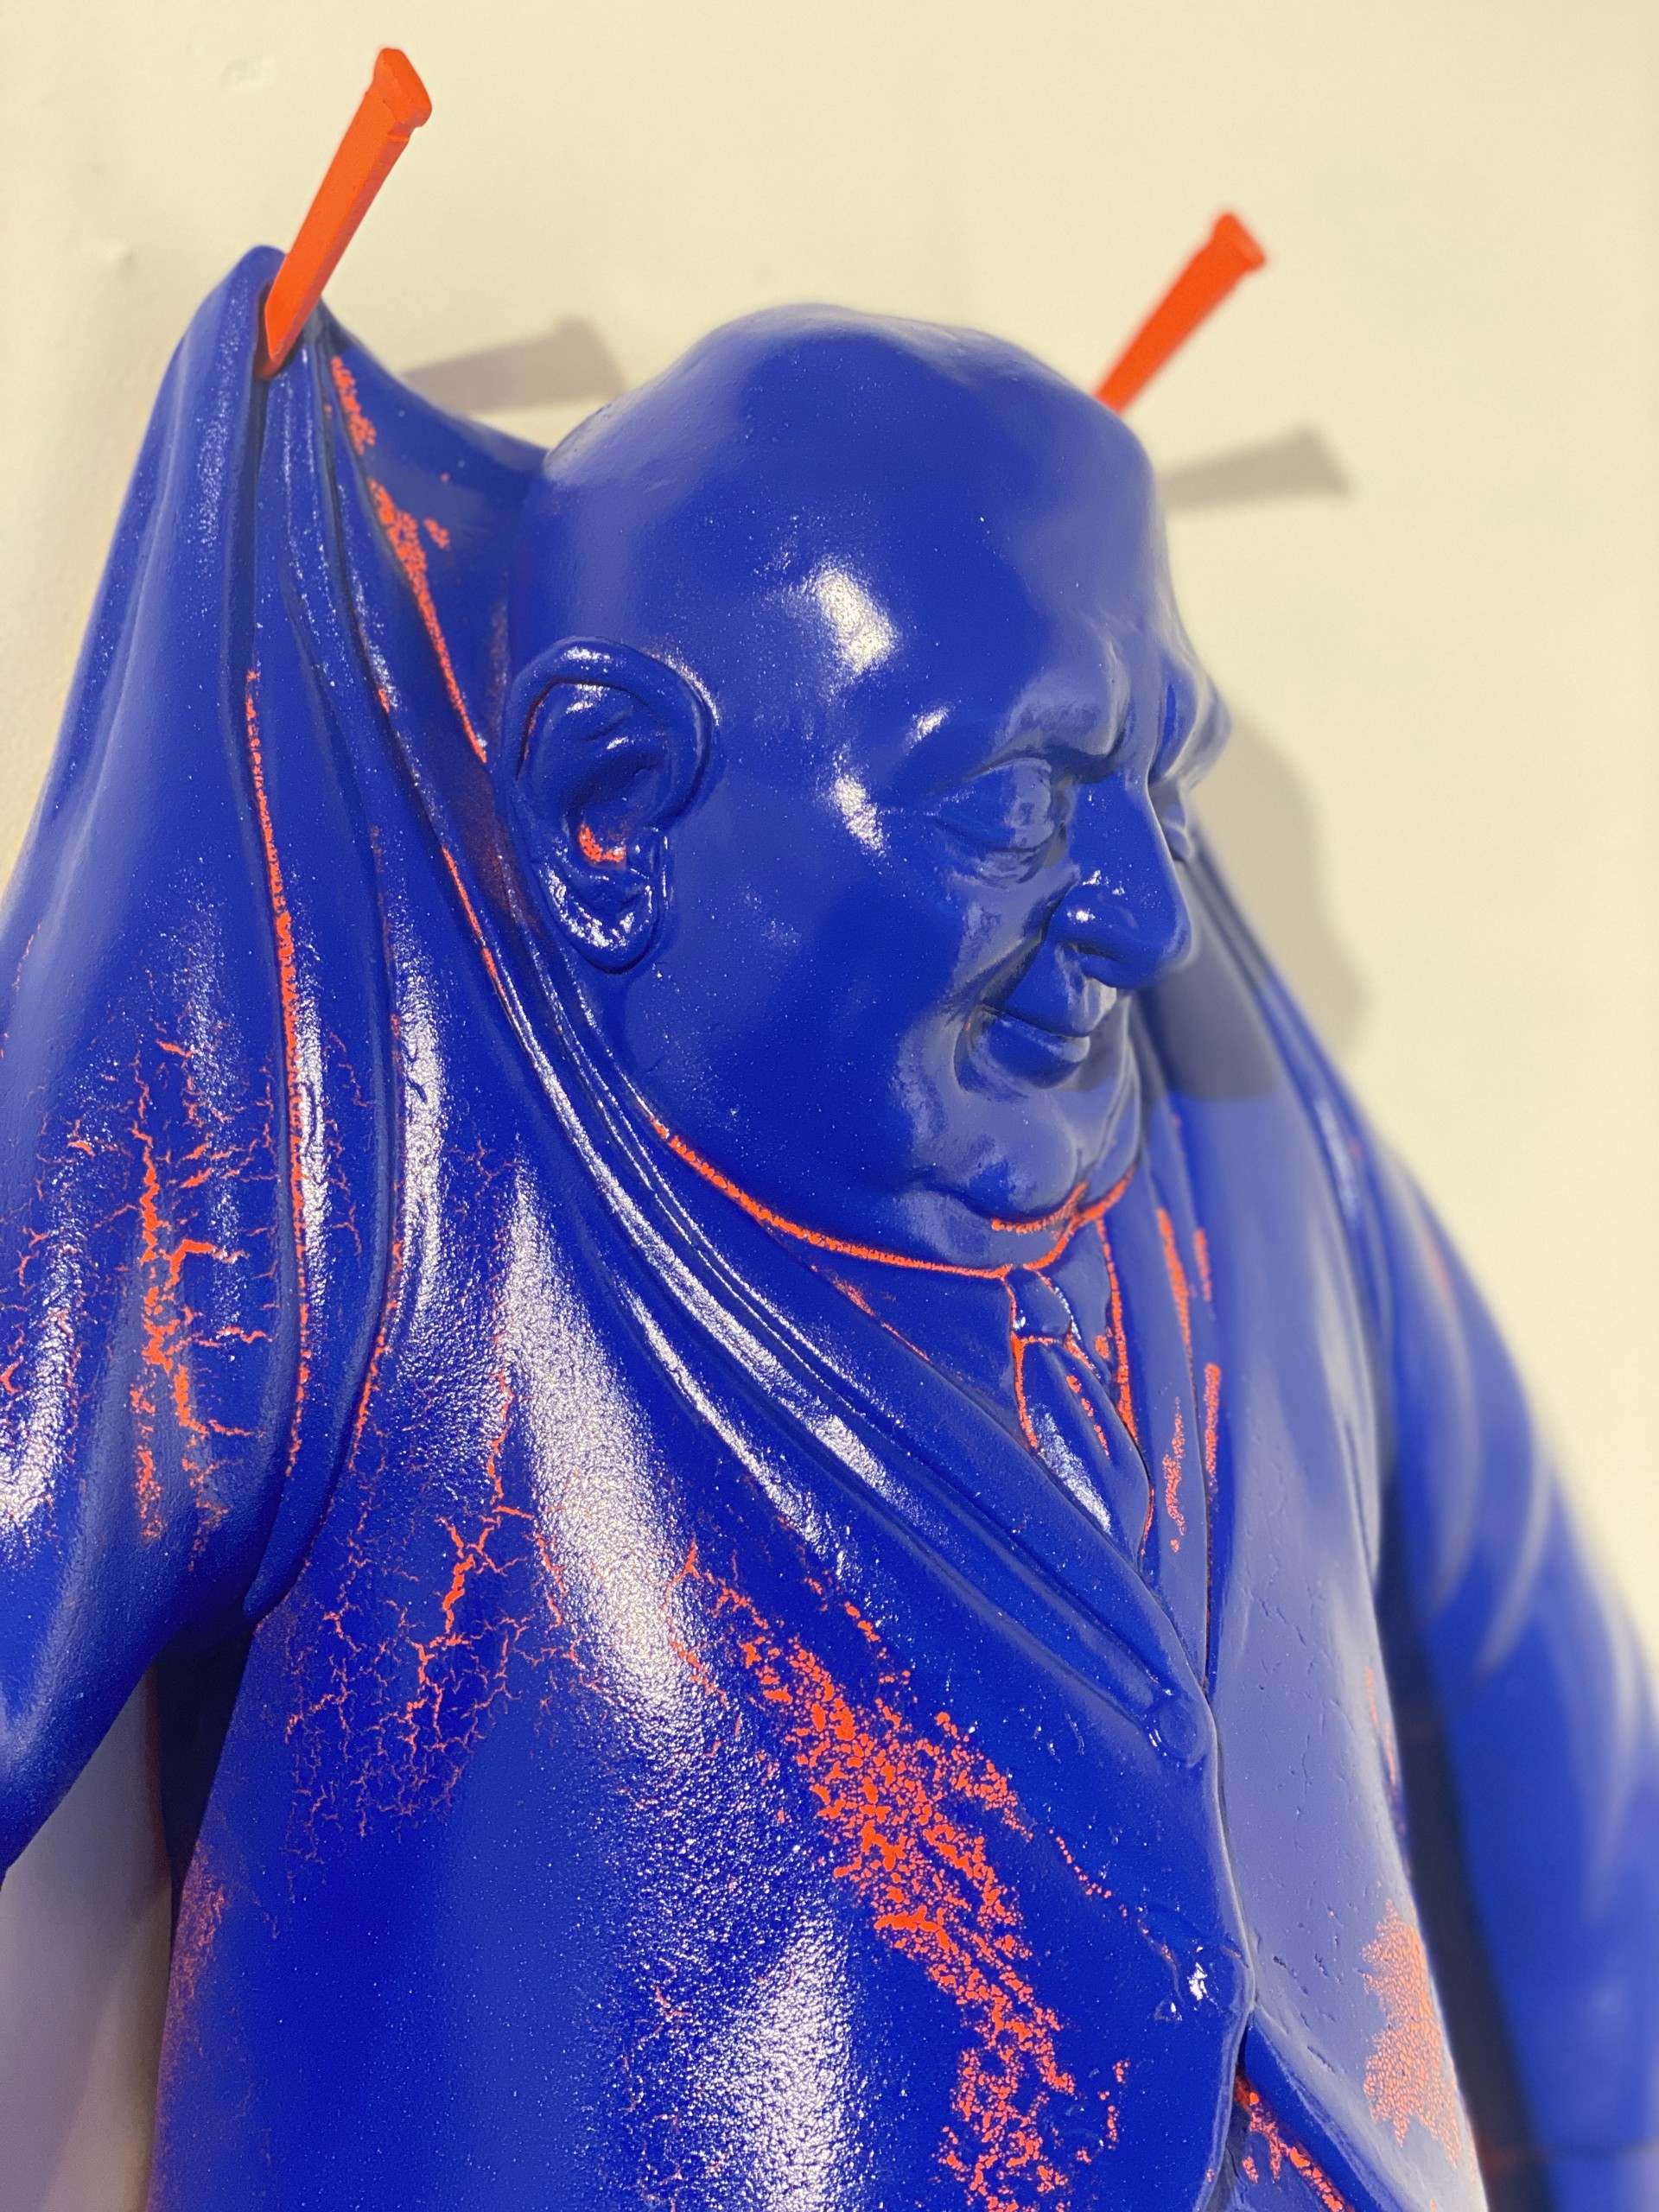 Artifact 12 (Cracked blue with orange undercoat) by Martin Spei